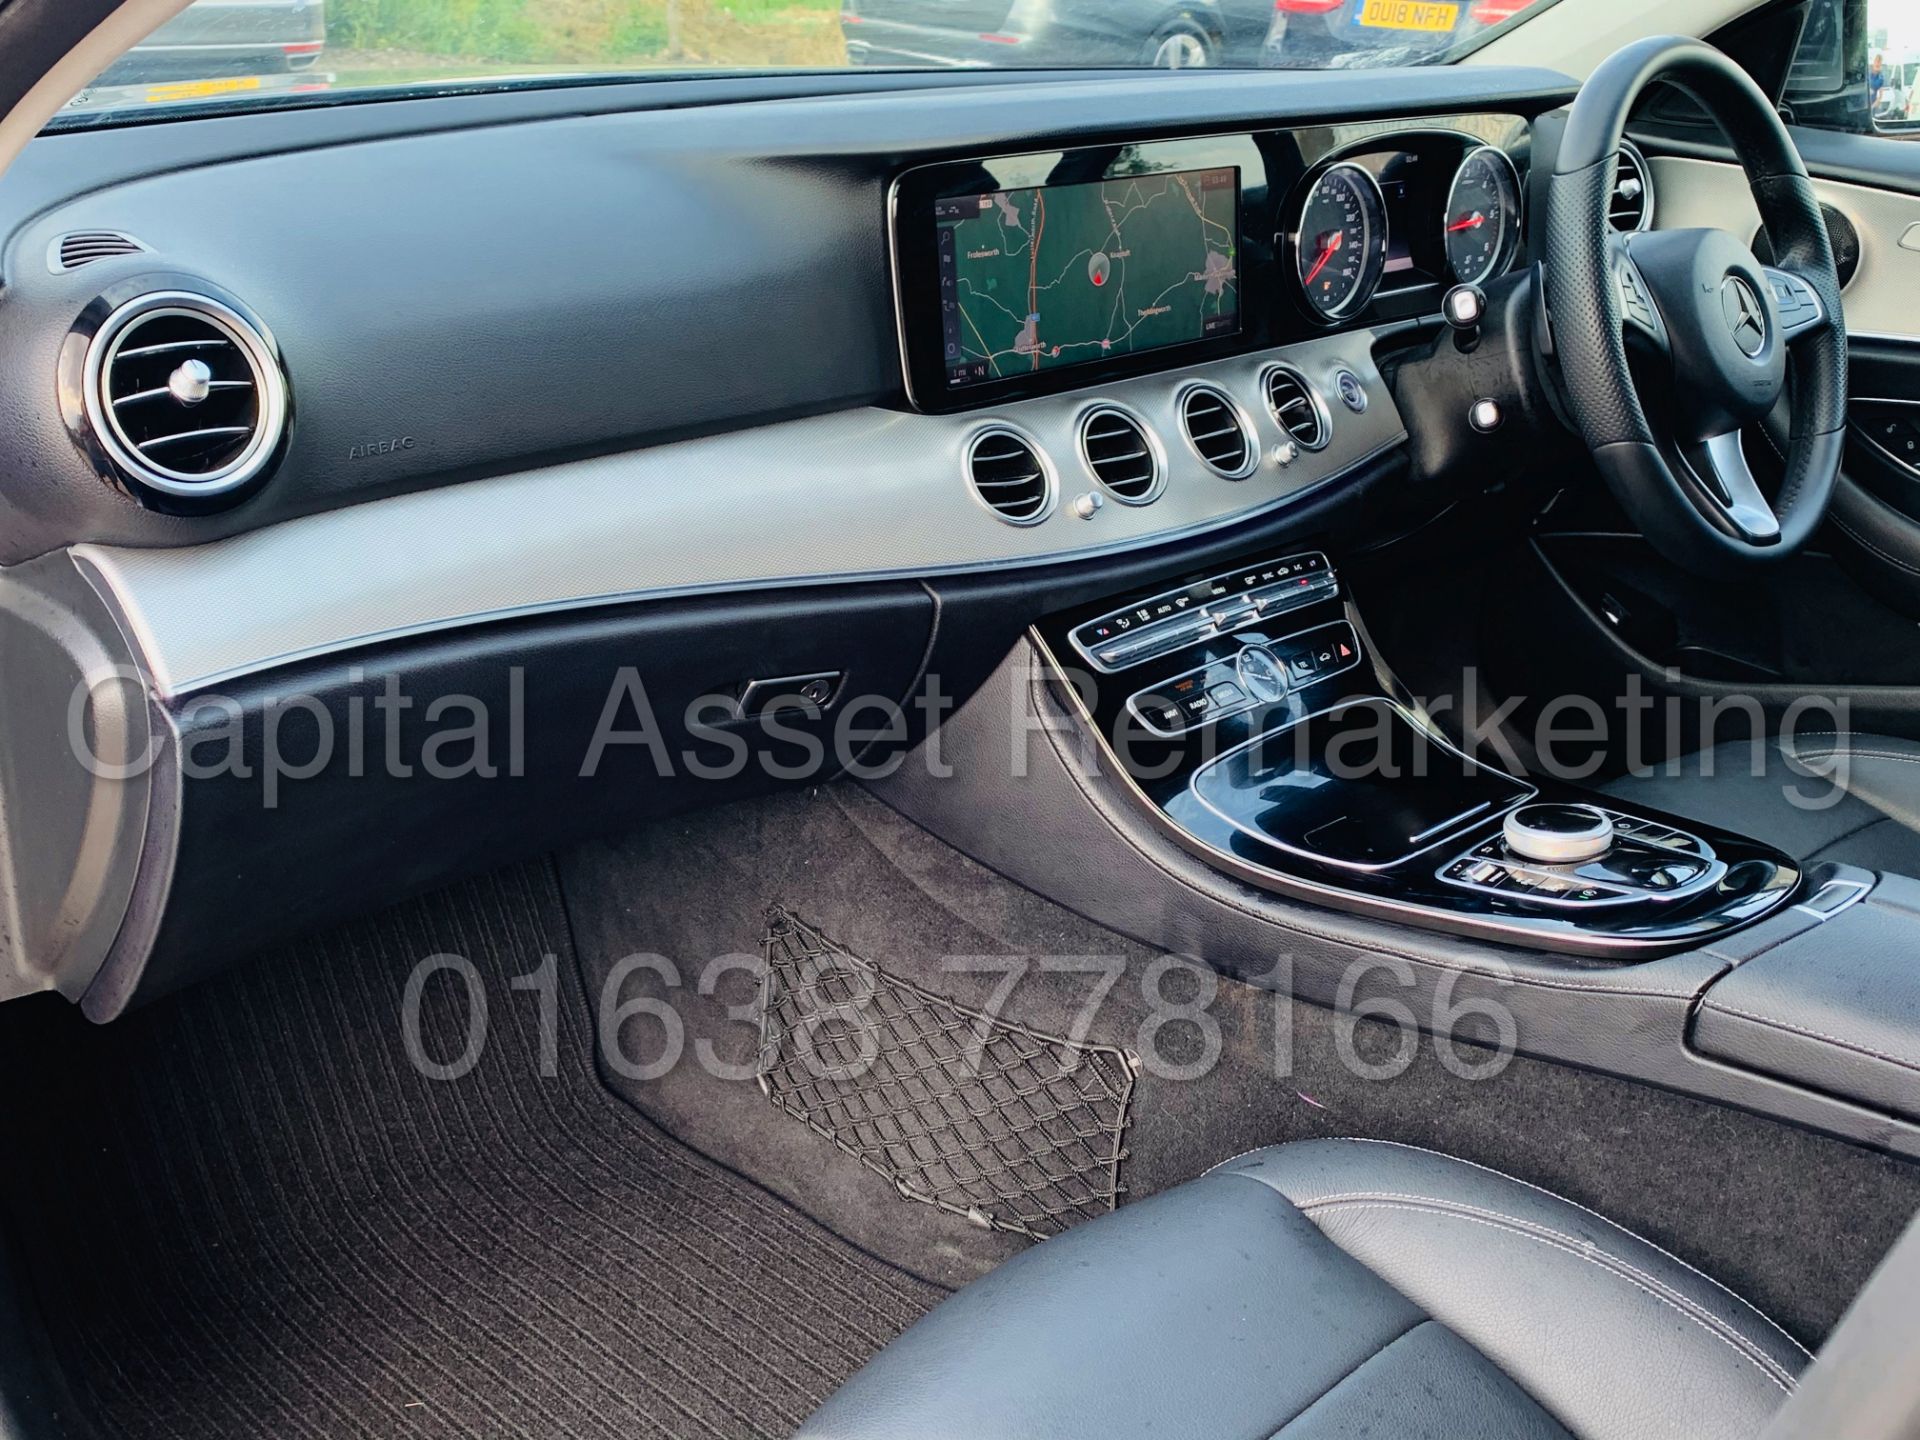 (On Sale) MERCEDES-BENZ E220d *SALOON* (2018 - NEW MODEL) '9G TRONIC AUTO - LEATHER - SAT NAV' - Image 21 of 50